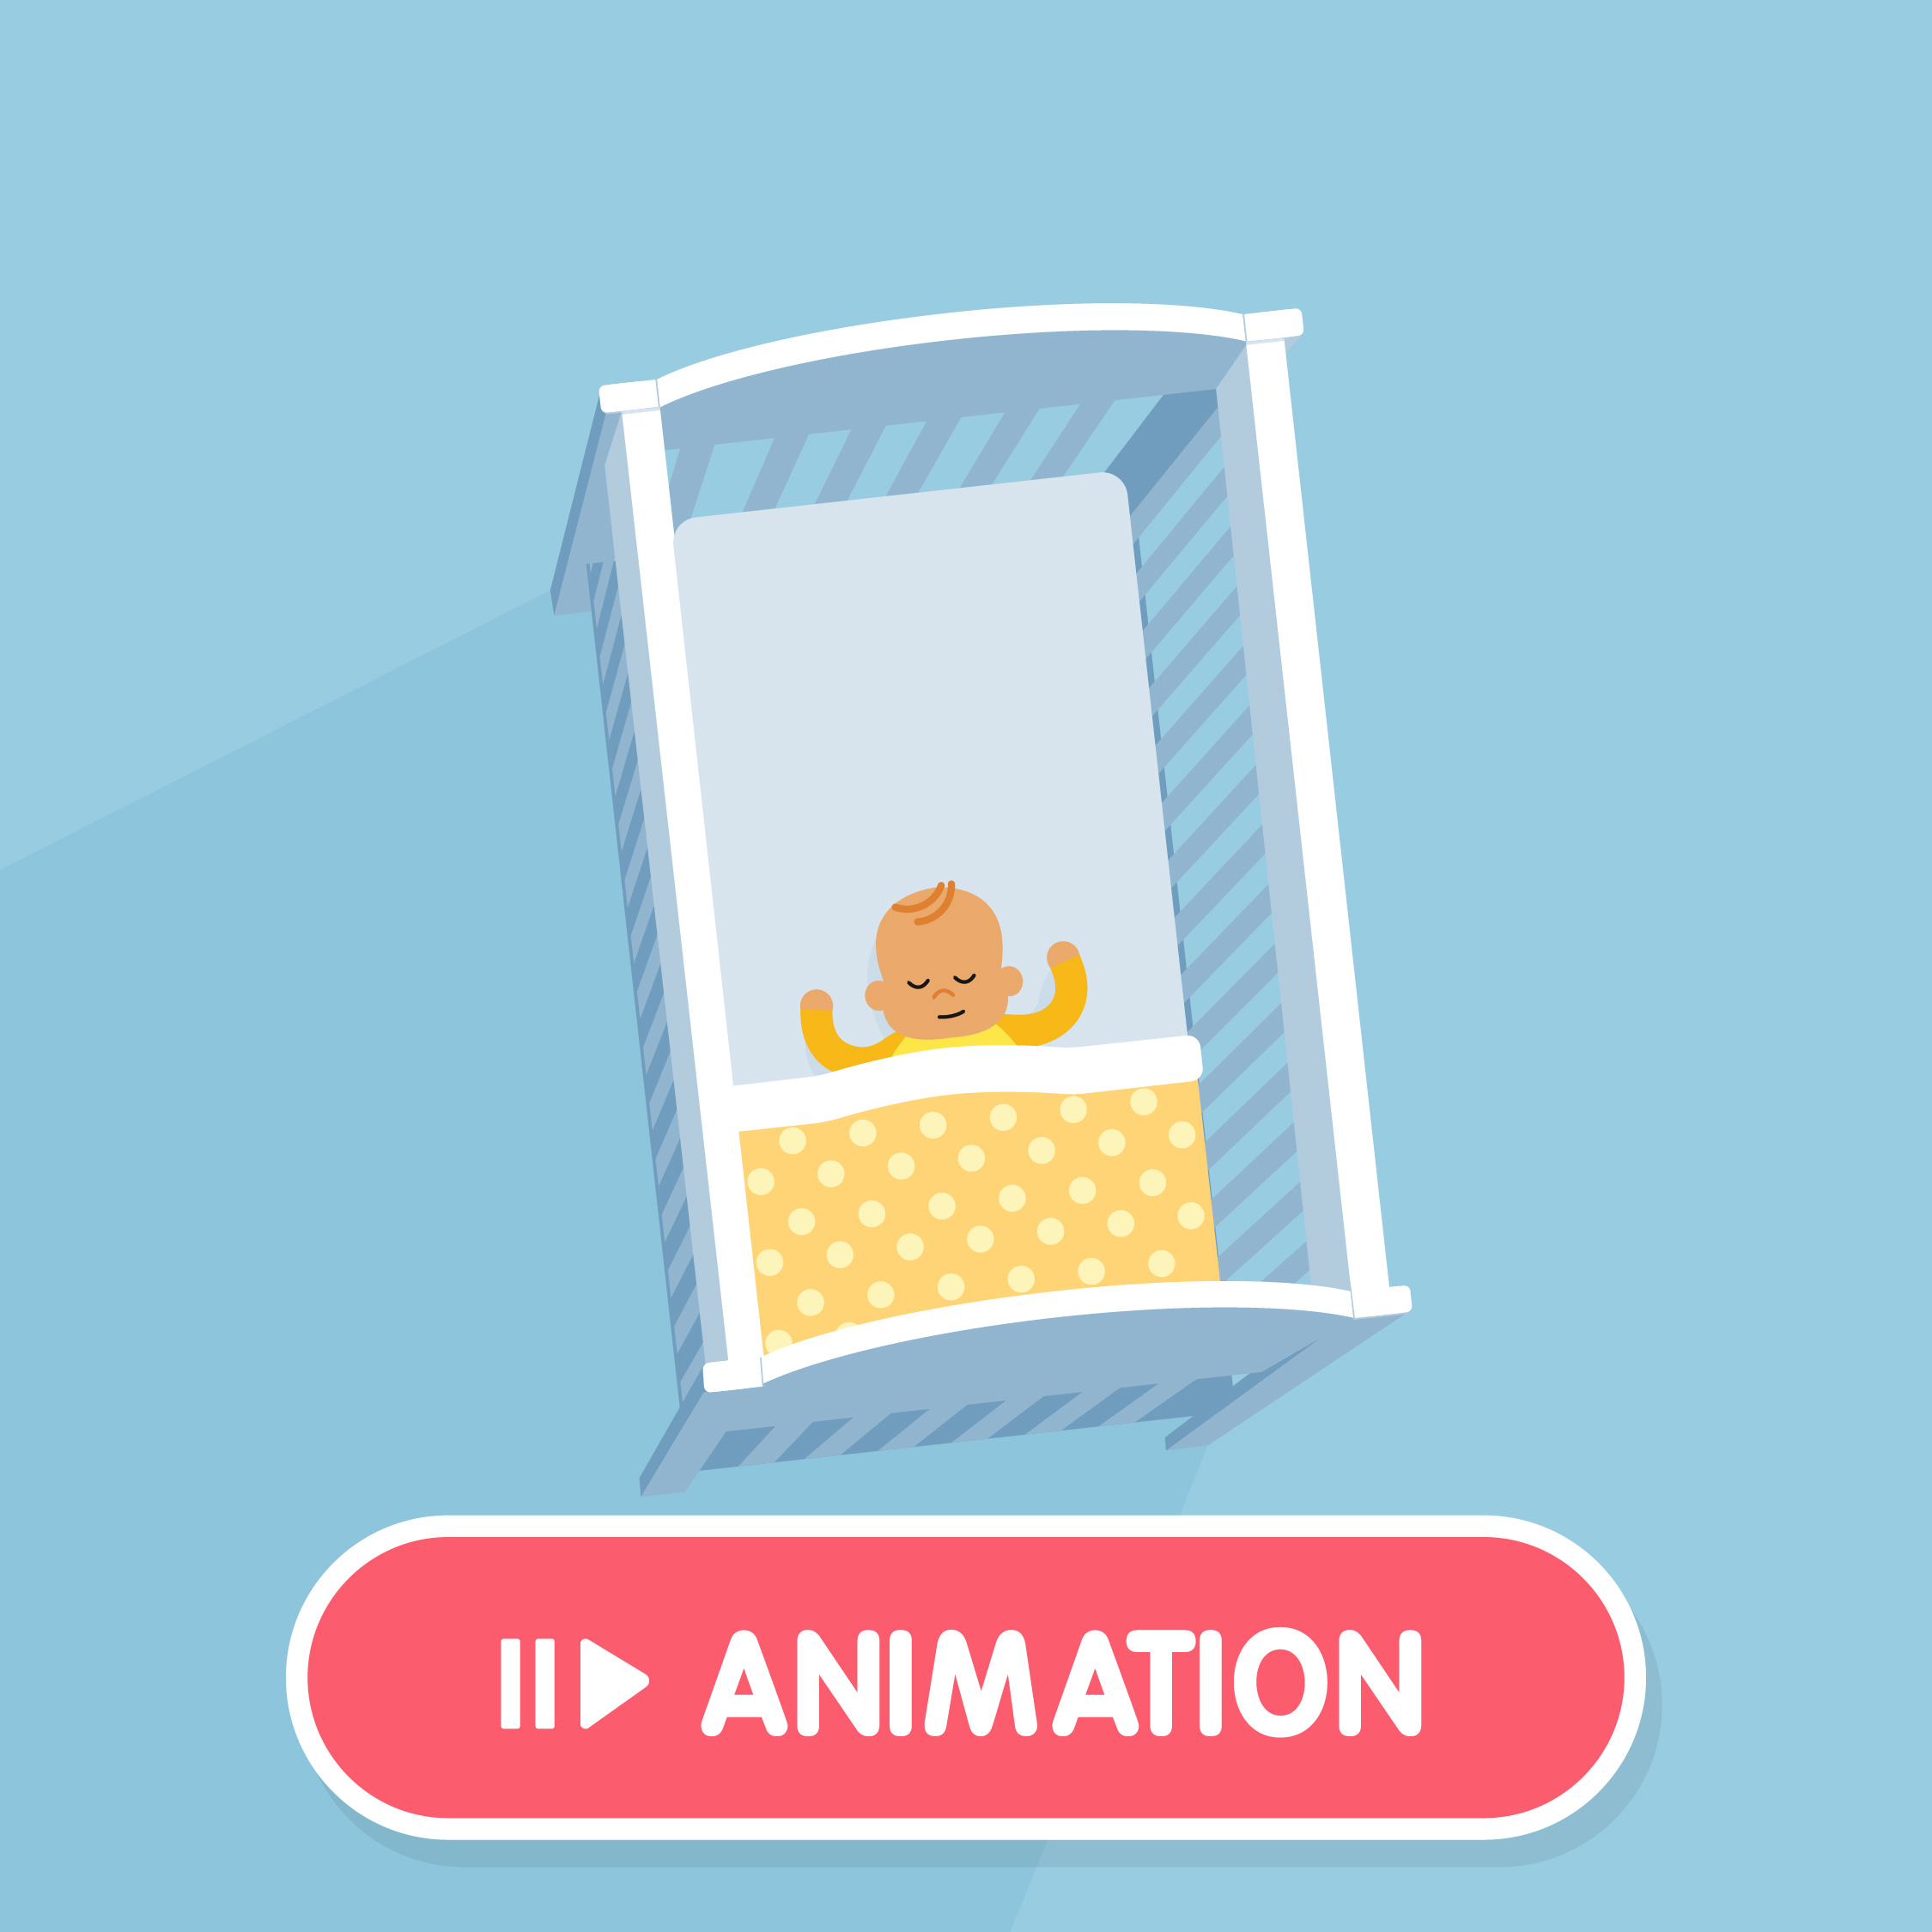 Safer sleep for babies resources - animation for expectant families